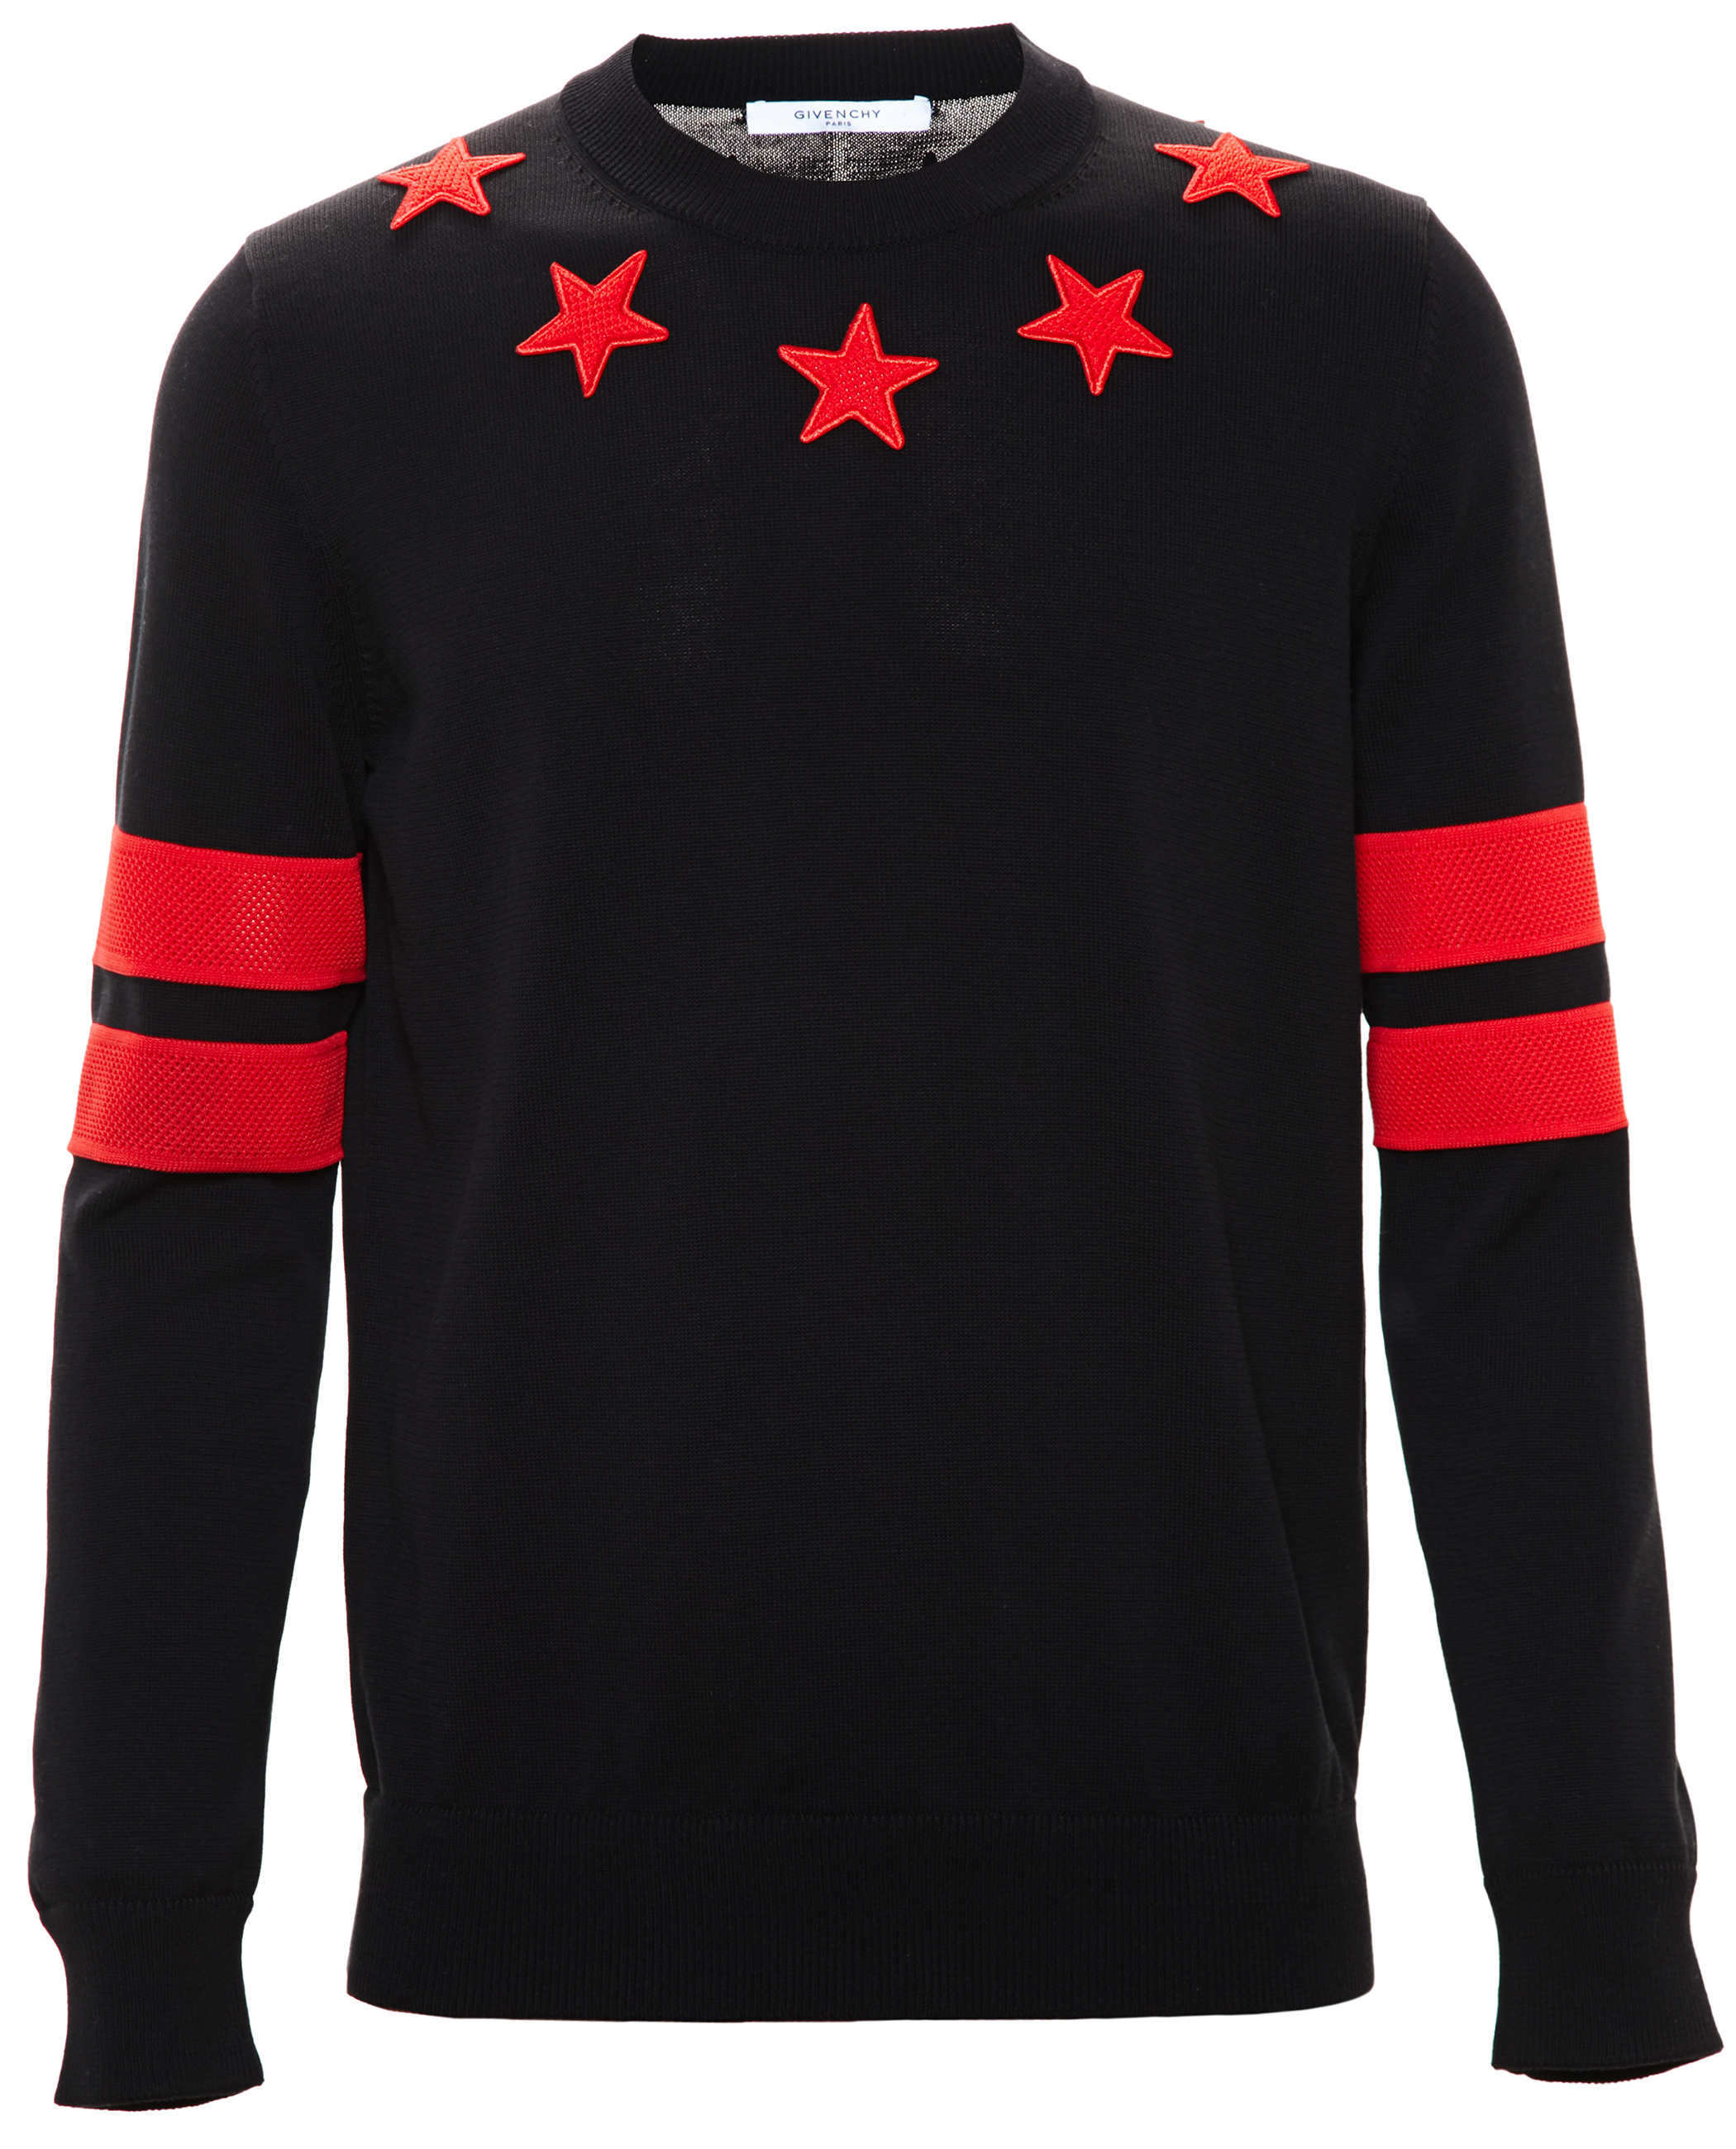 Givenchy Stars And Stripes Jumper in Black for Men - Lyst